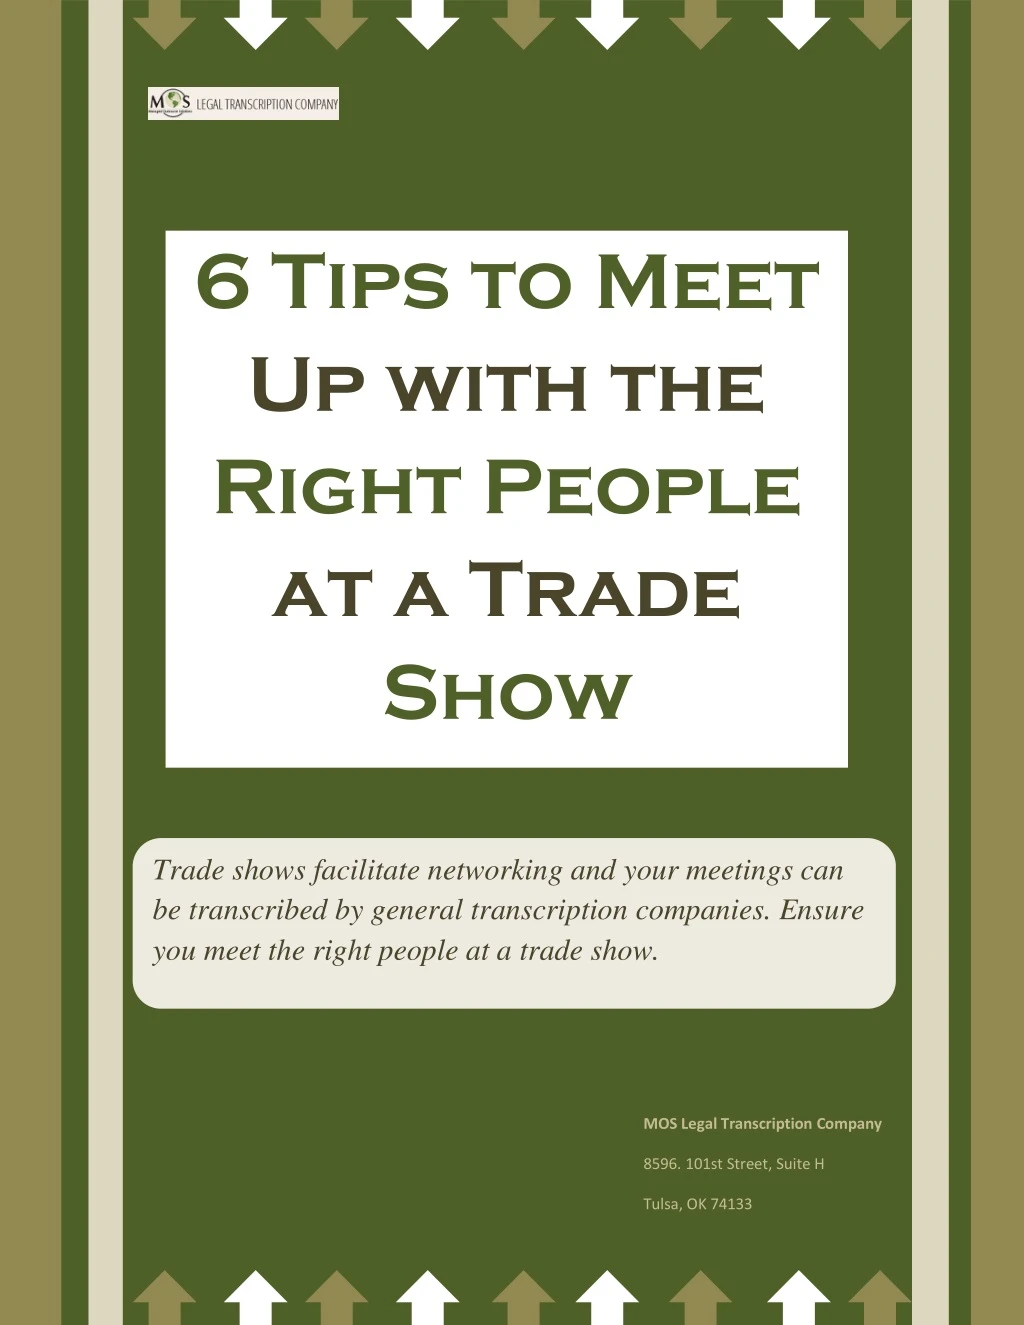 6 tips to meet up with the right people